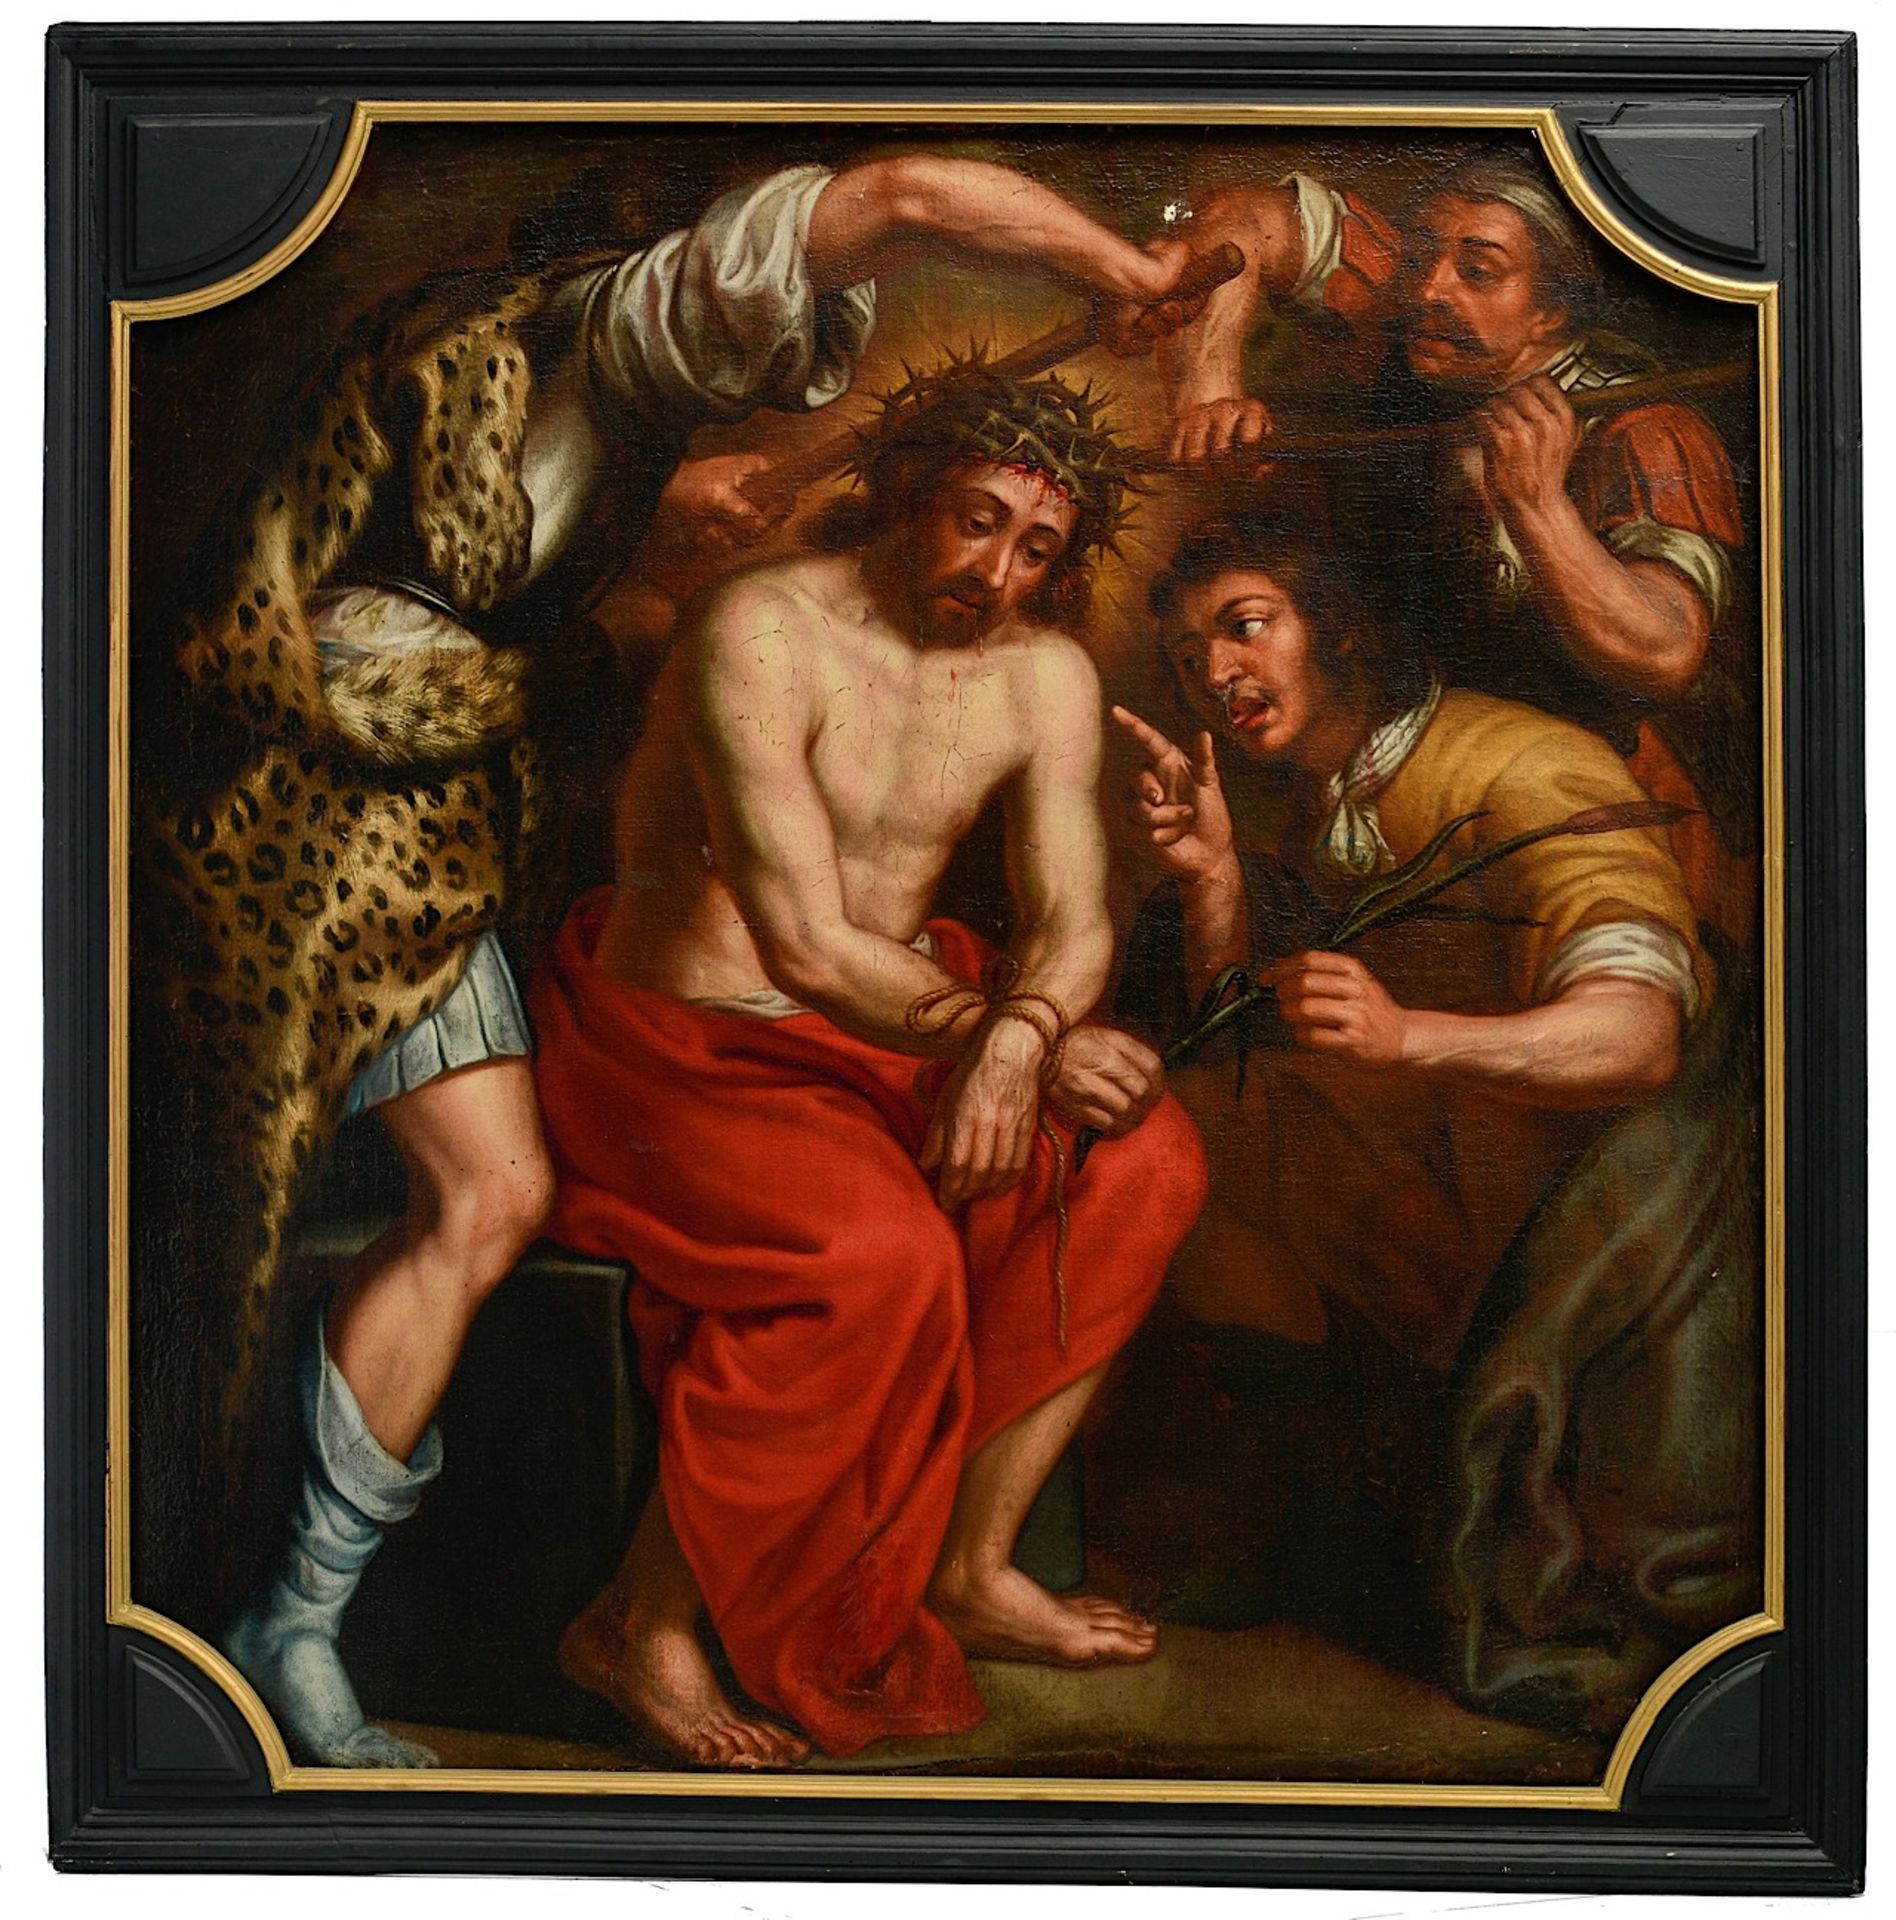 The Crowning with Thorns, 17thC, the Low Countries, oil on canvas, 112 x 112 cm. (44.0 x 44.0 in.), - Image 2 of 8